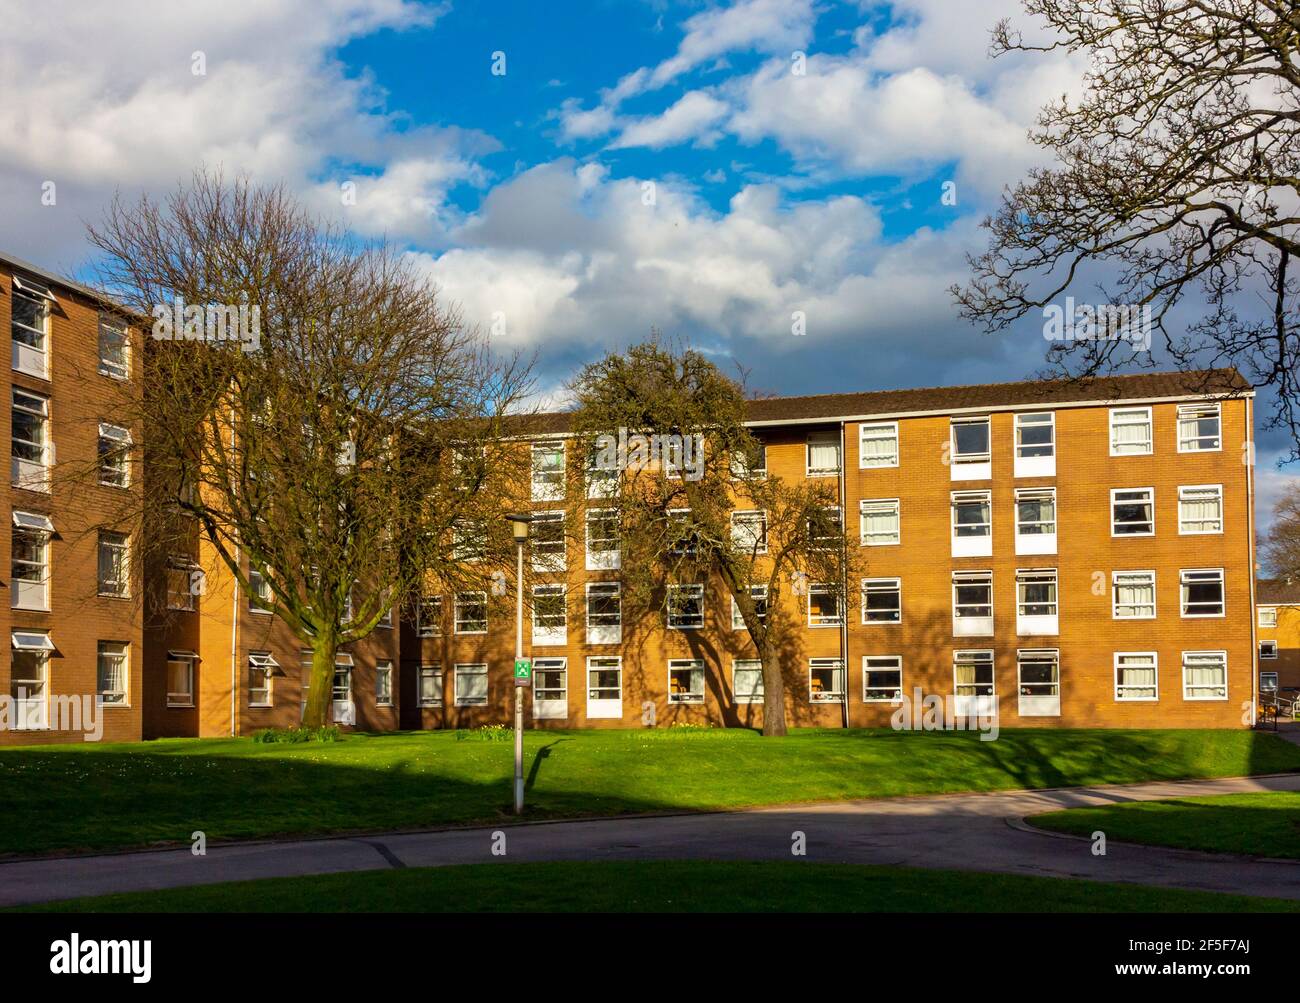 Fallowfield Halls of Residence on the University of Manchester campus England UK Stock Photo